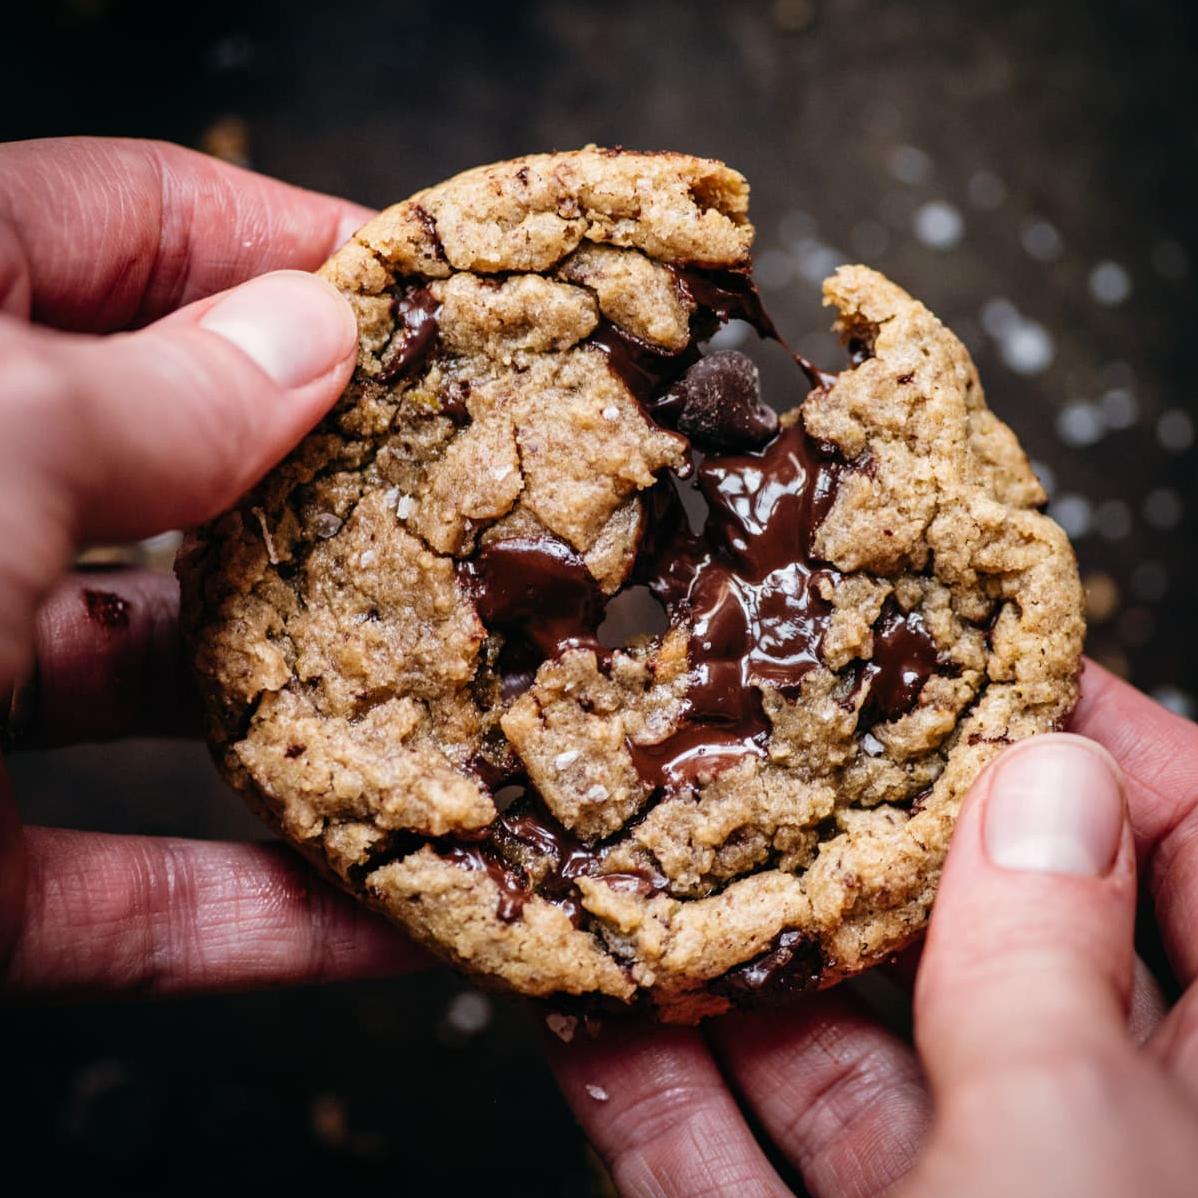  These cookies are so good, you won’t even realize they’re healthy.